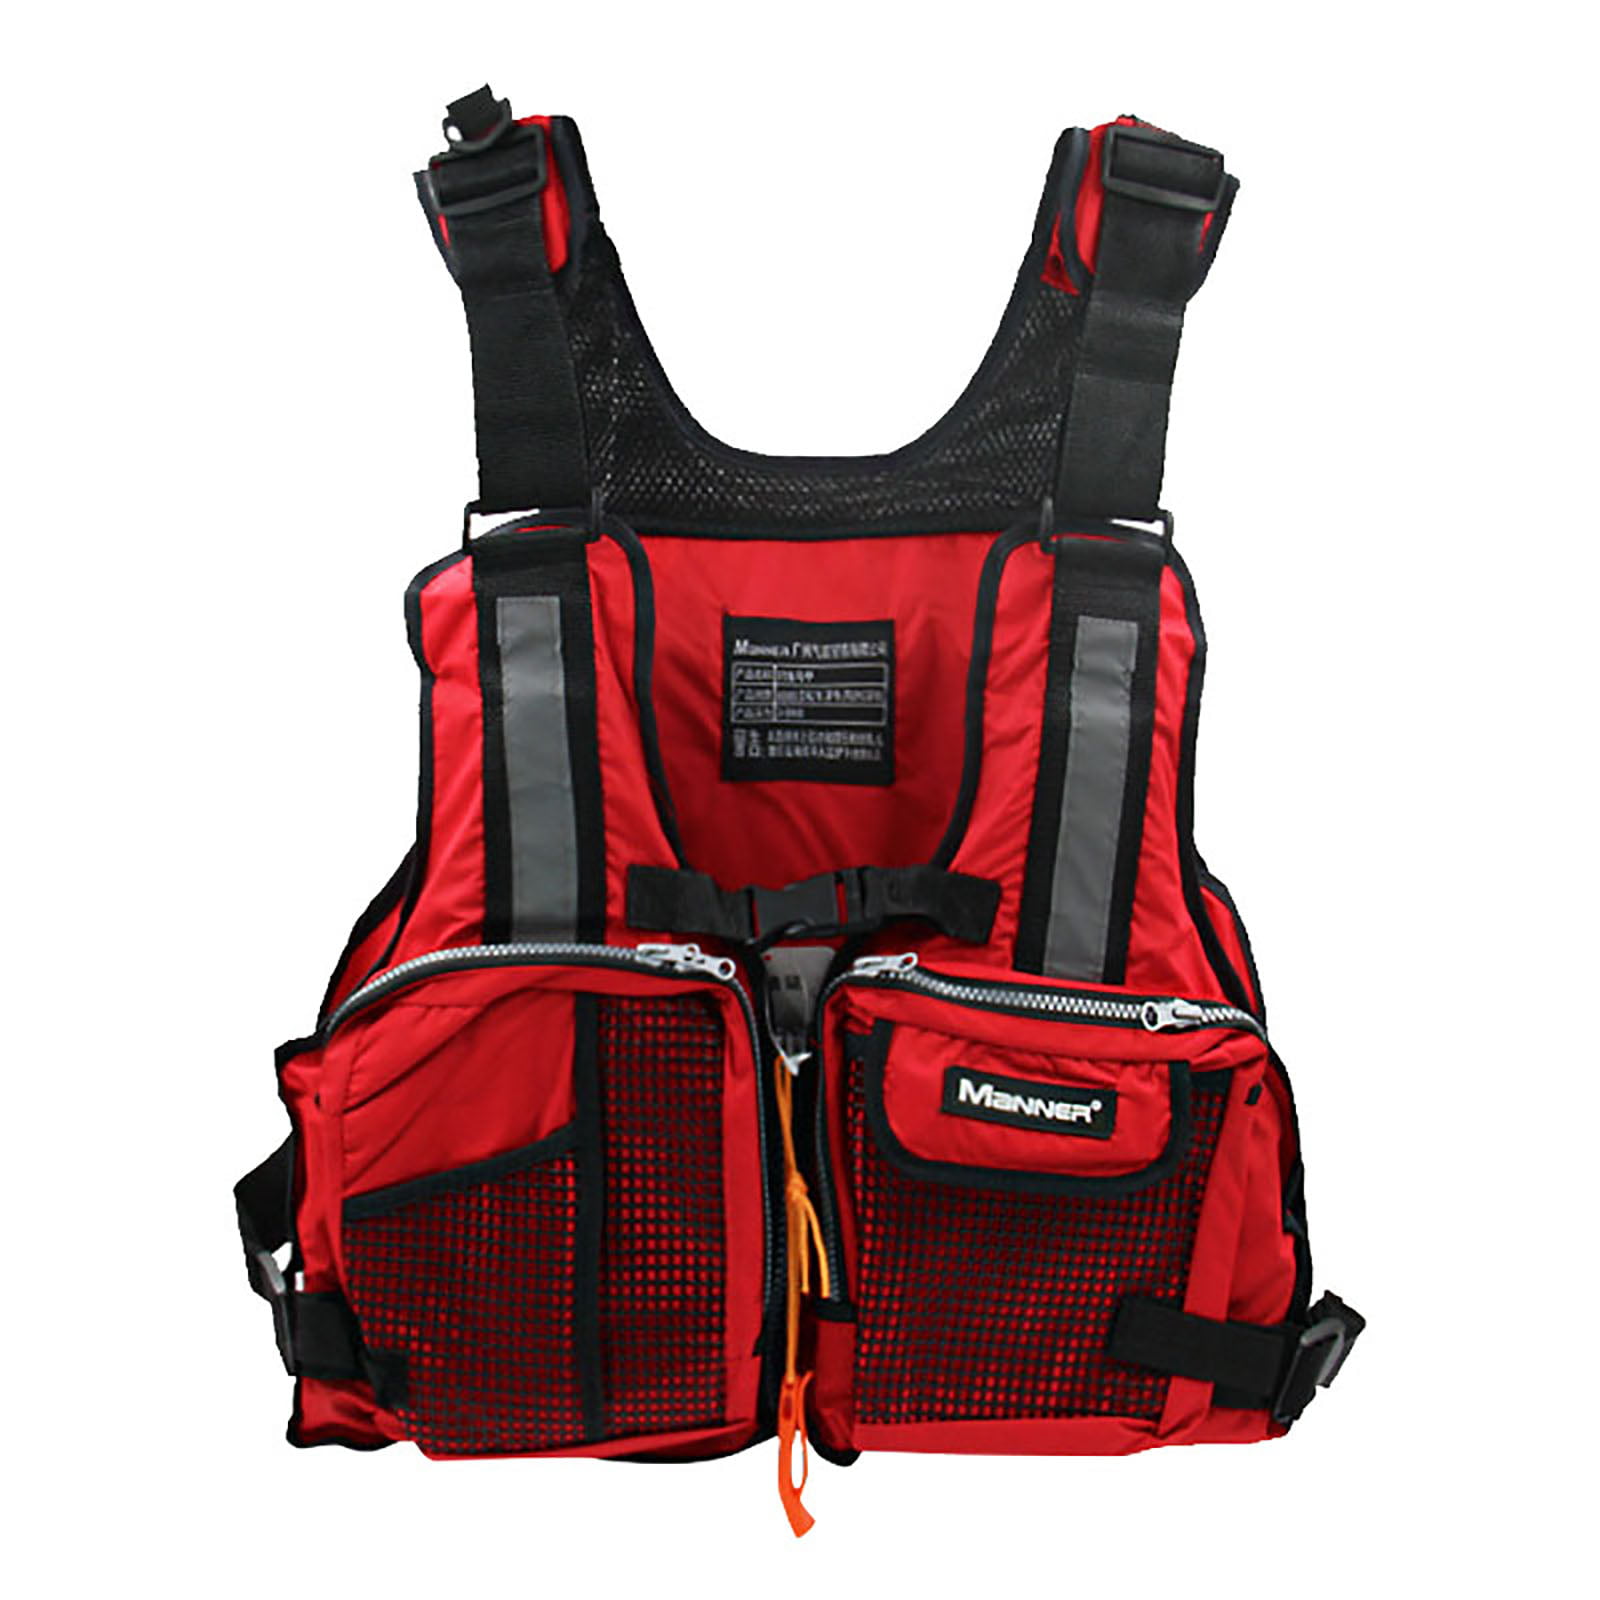 Safe swimming life jacket vest - Bright and eye-catching, with ...